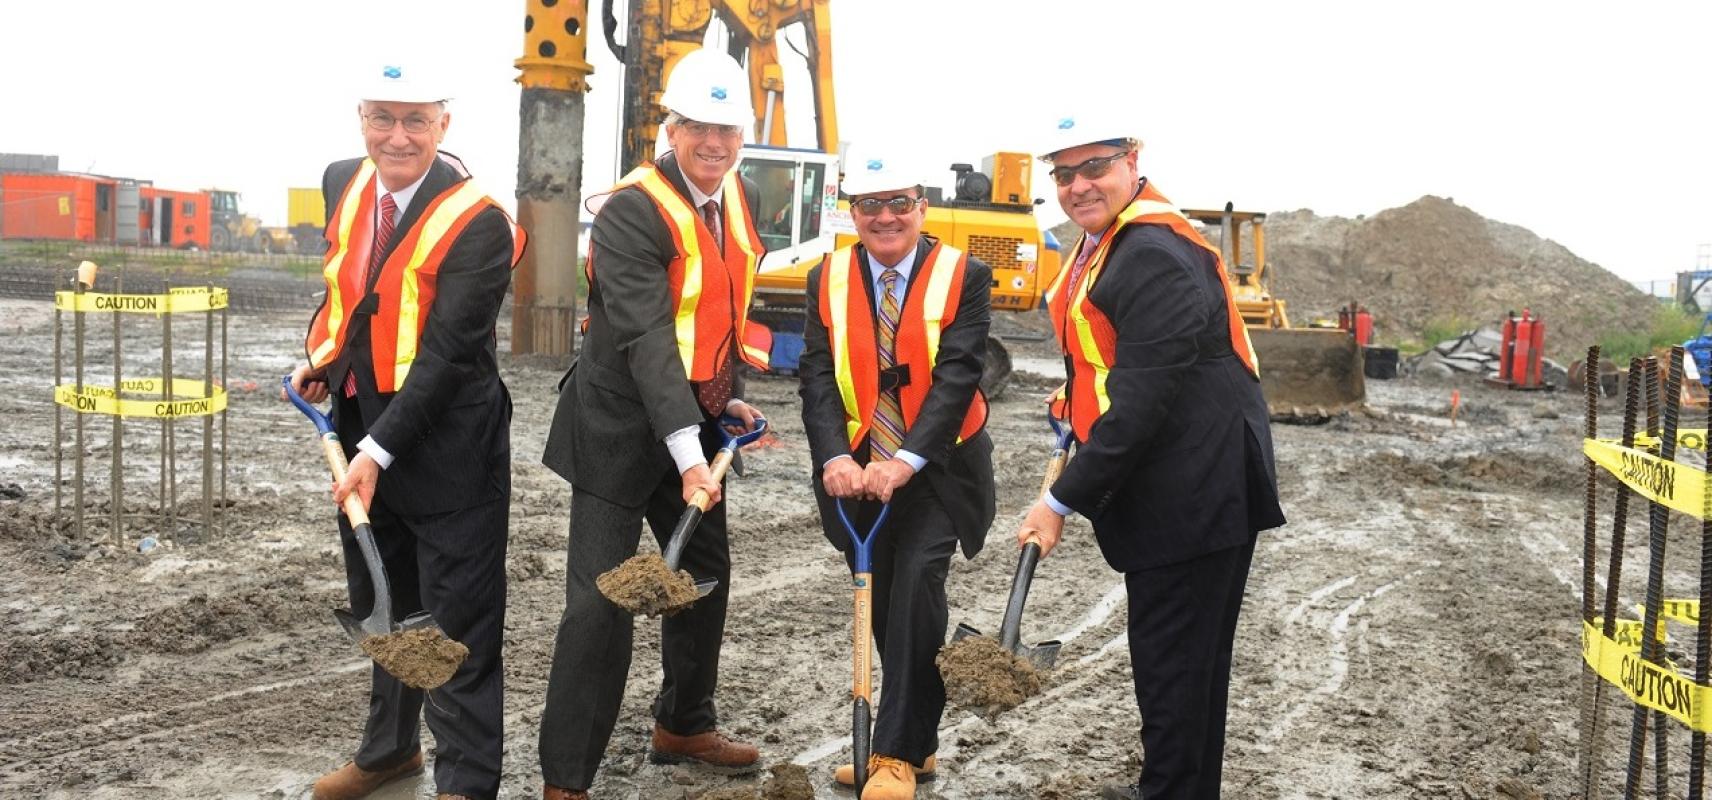 dignitaries posing at a construction groundbreaking event